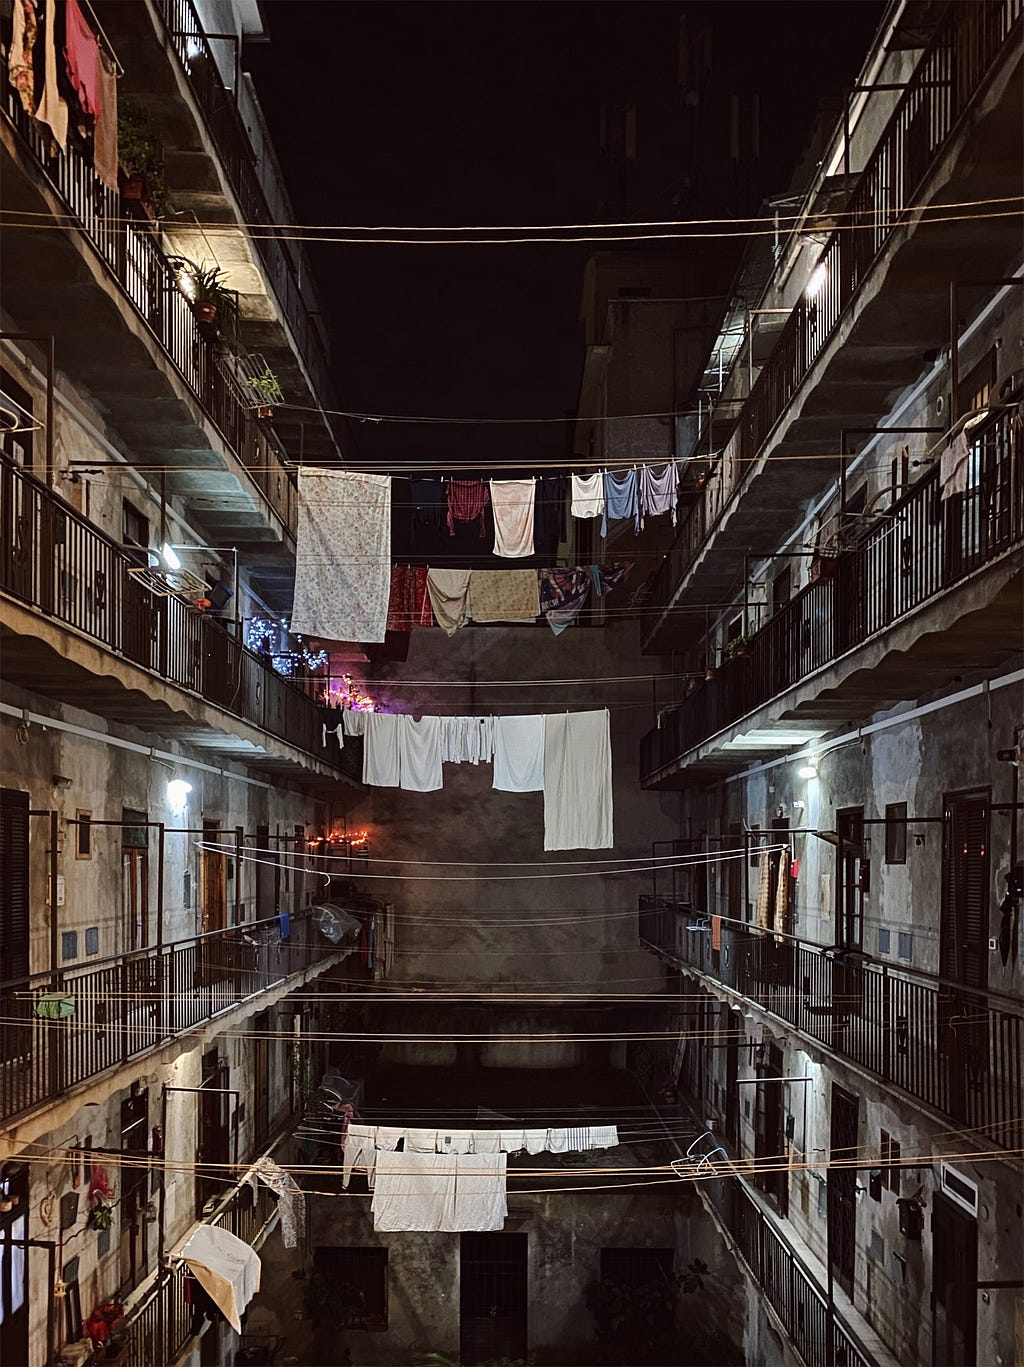 An urban apartment building with clothes hanging out to dry in the night